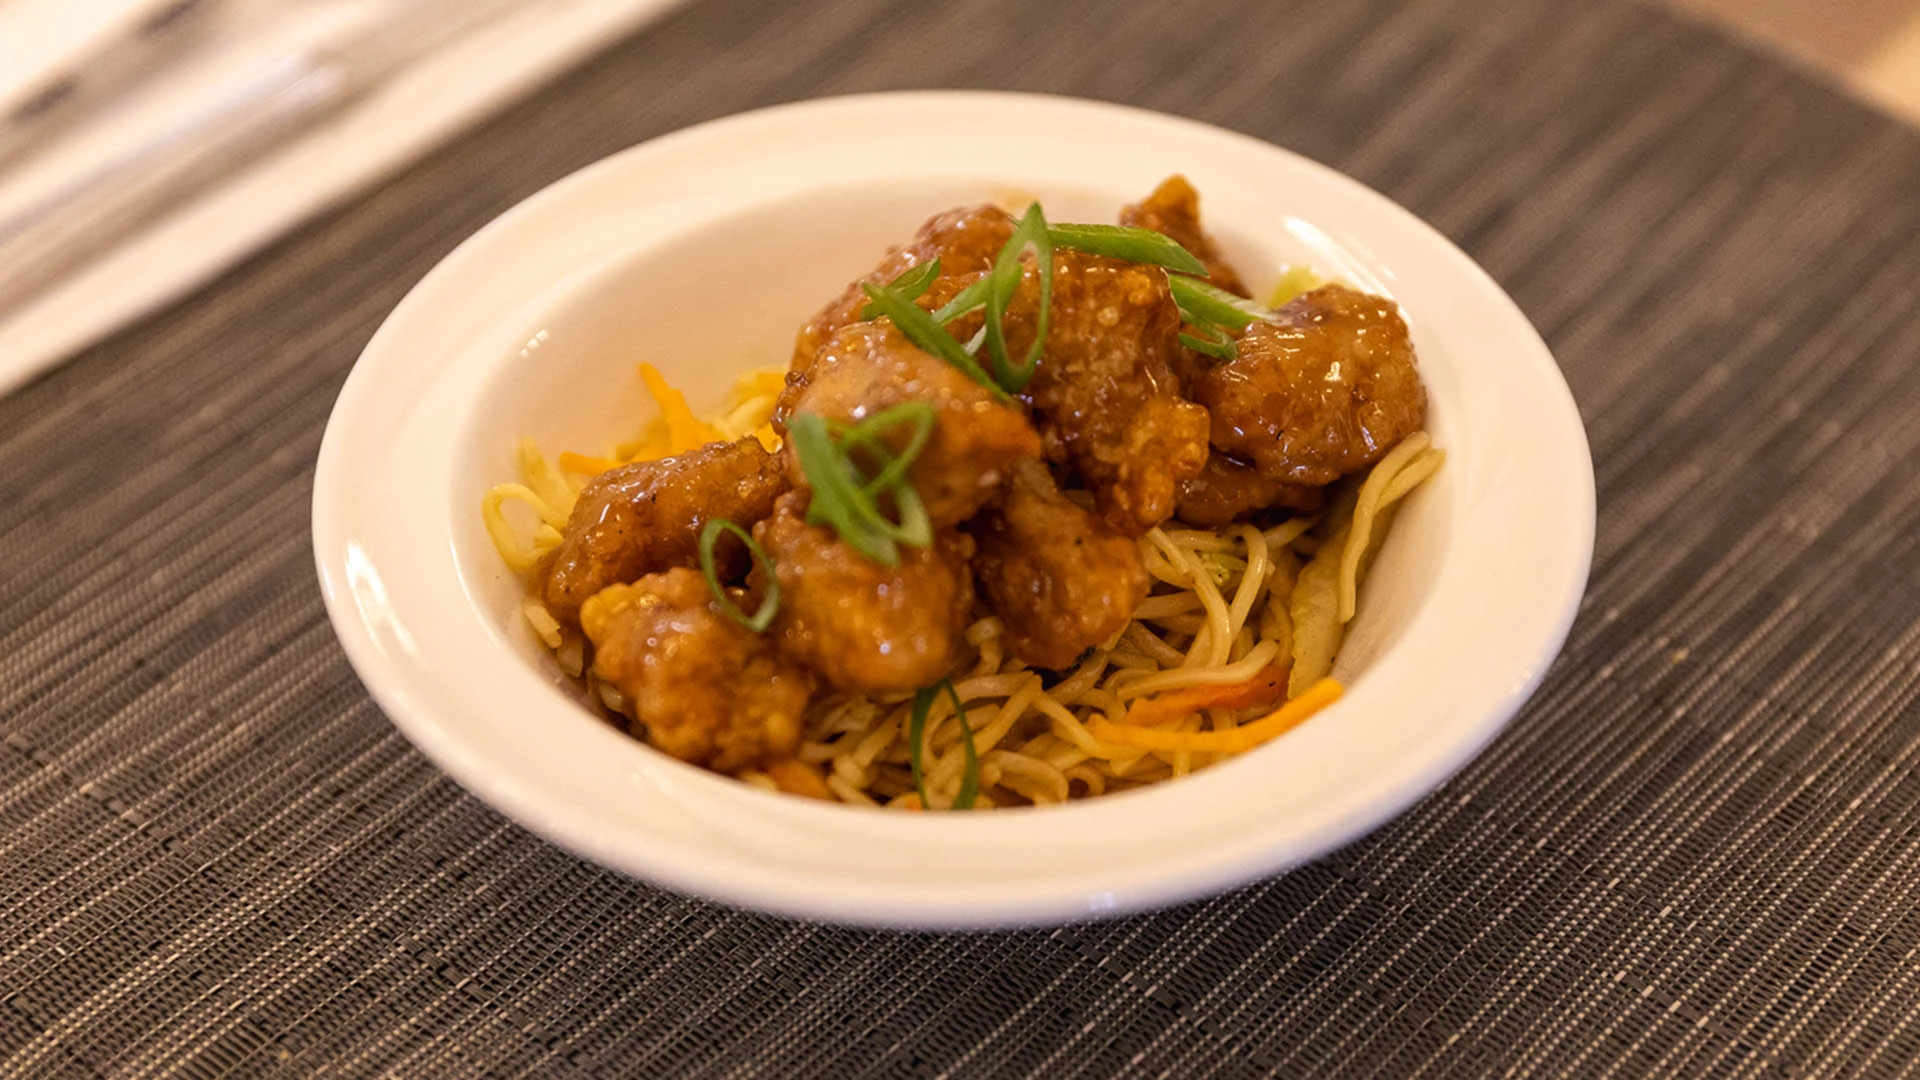 A bowl of orange chicken served over stir-fried noodles and vegetables, garnished with green onions, on a dark textured tablecloth.